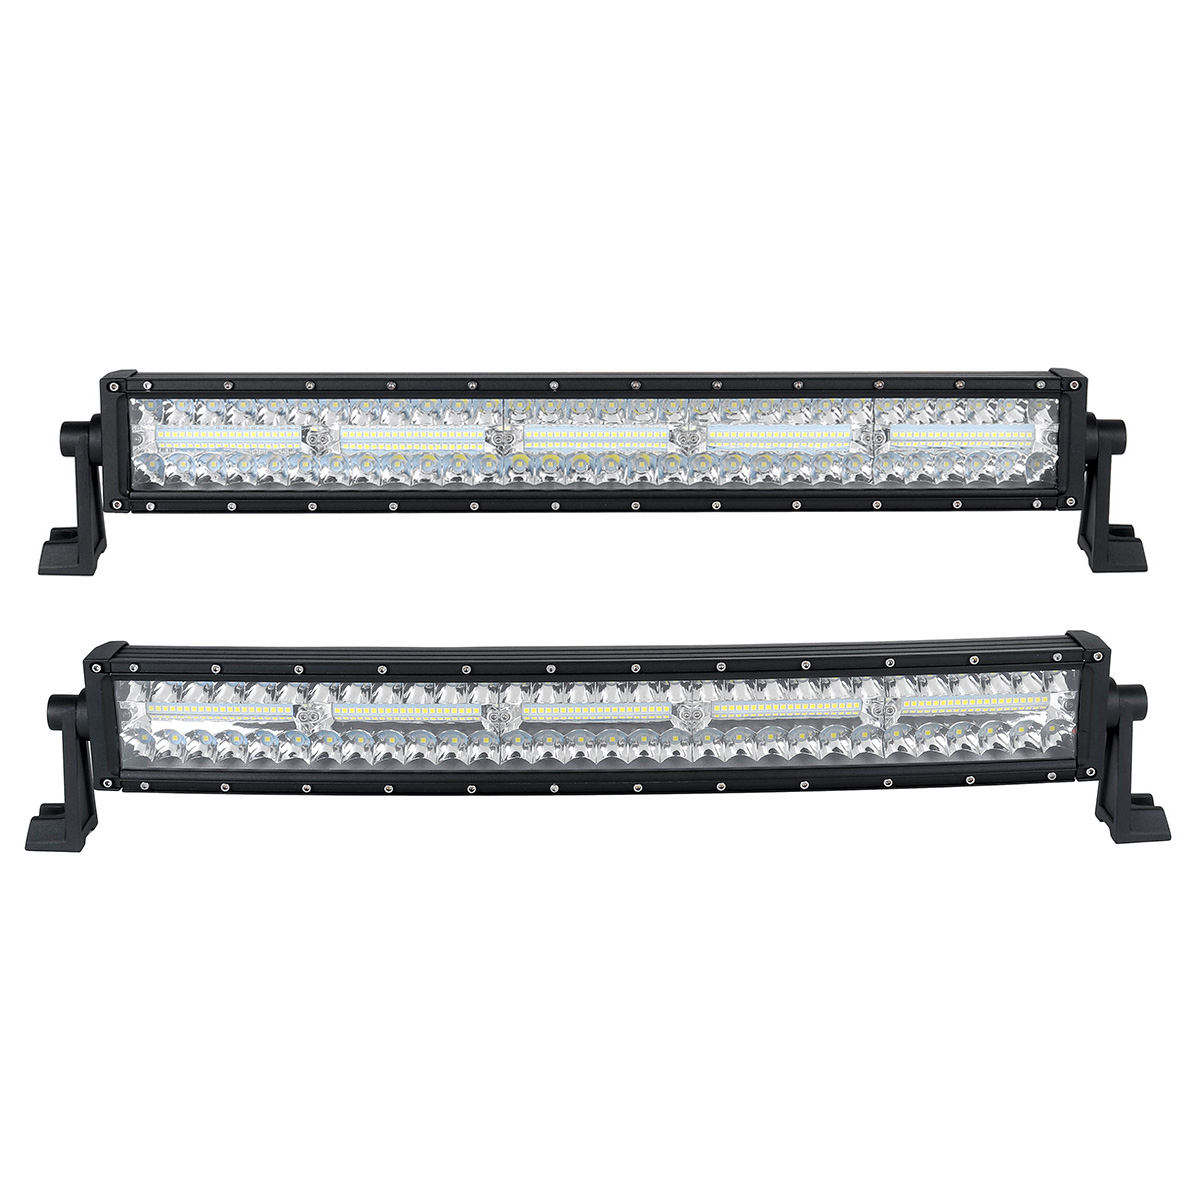 22 Inch 480W Triple Row LED Work Light Bar Combo Driving Lamp for off Road Truck Baot SUV